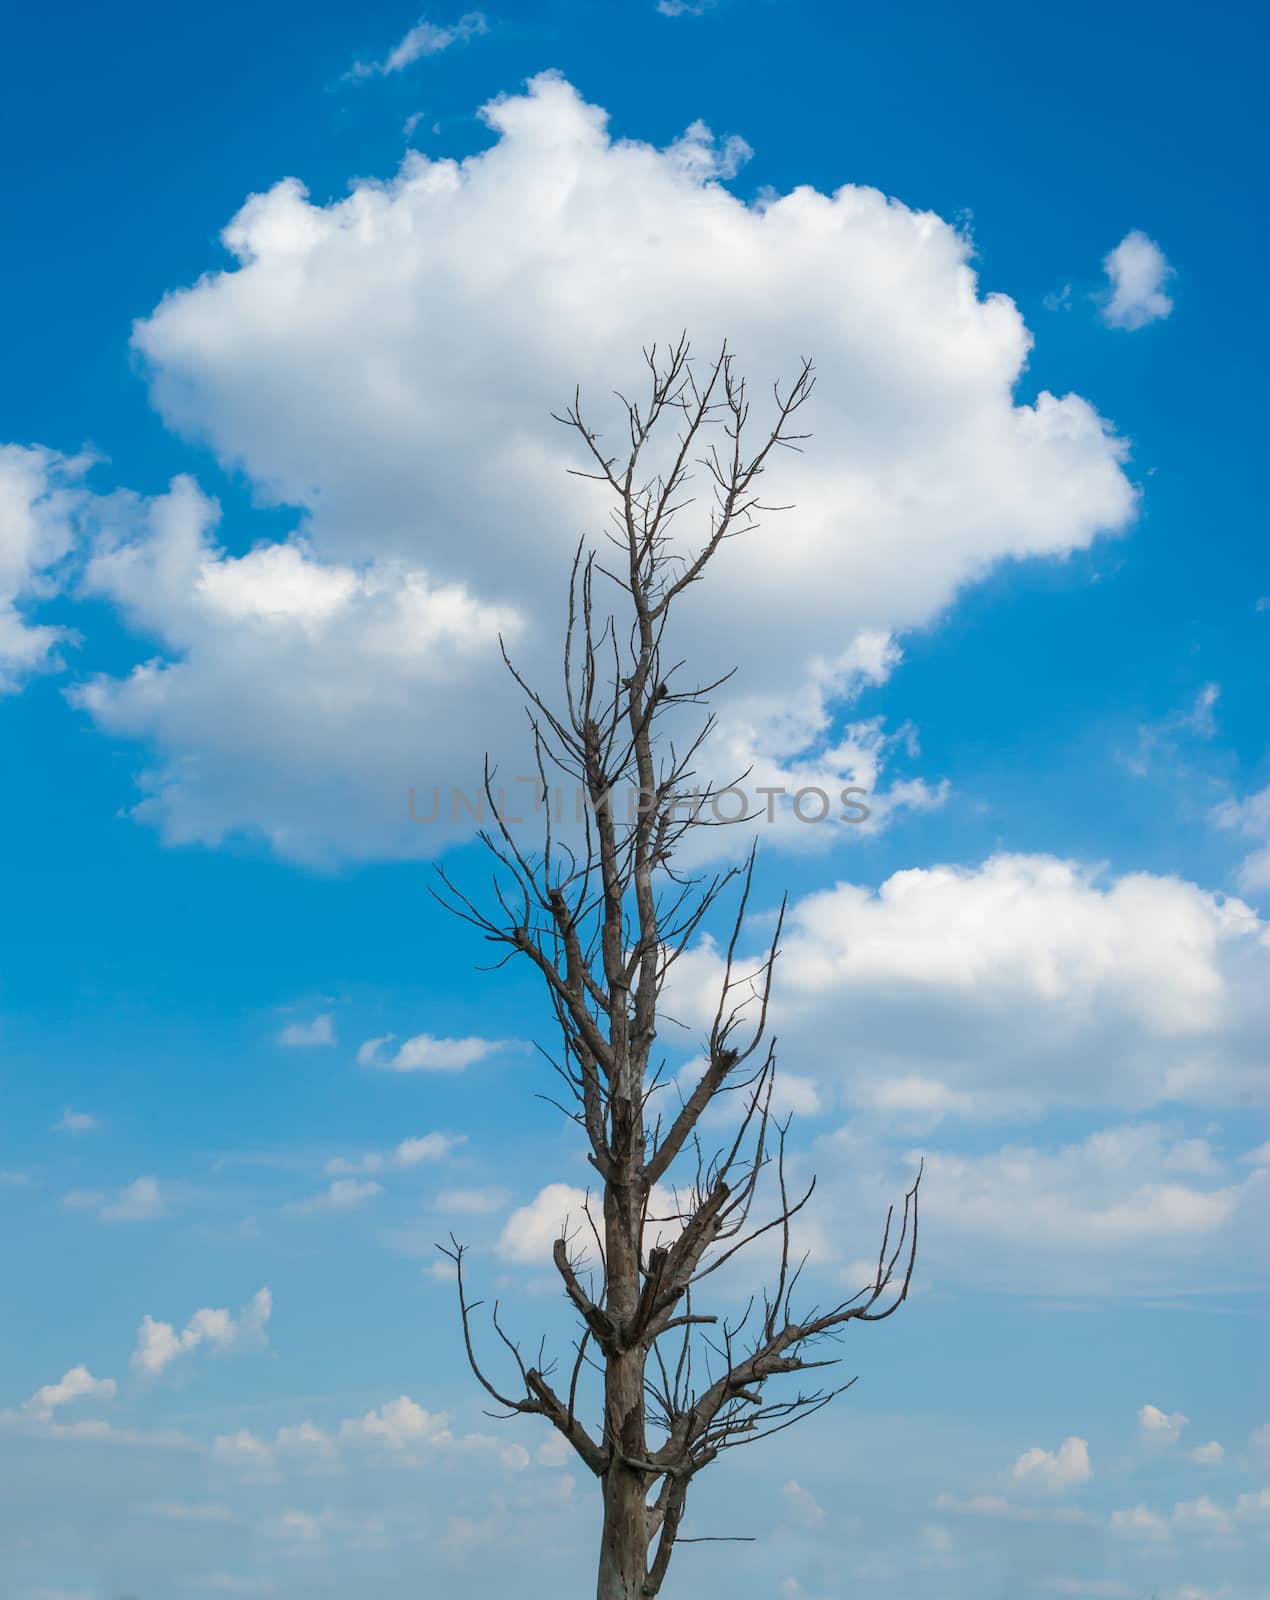 Dead tree with blue sky and cloud by seksan44